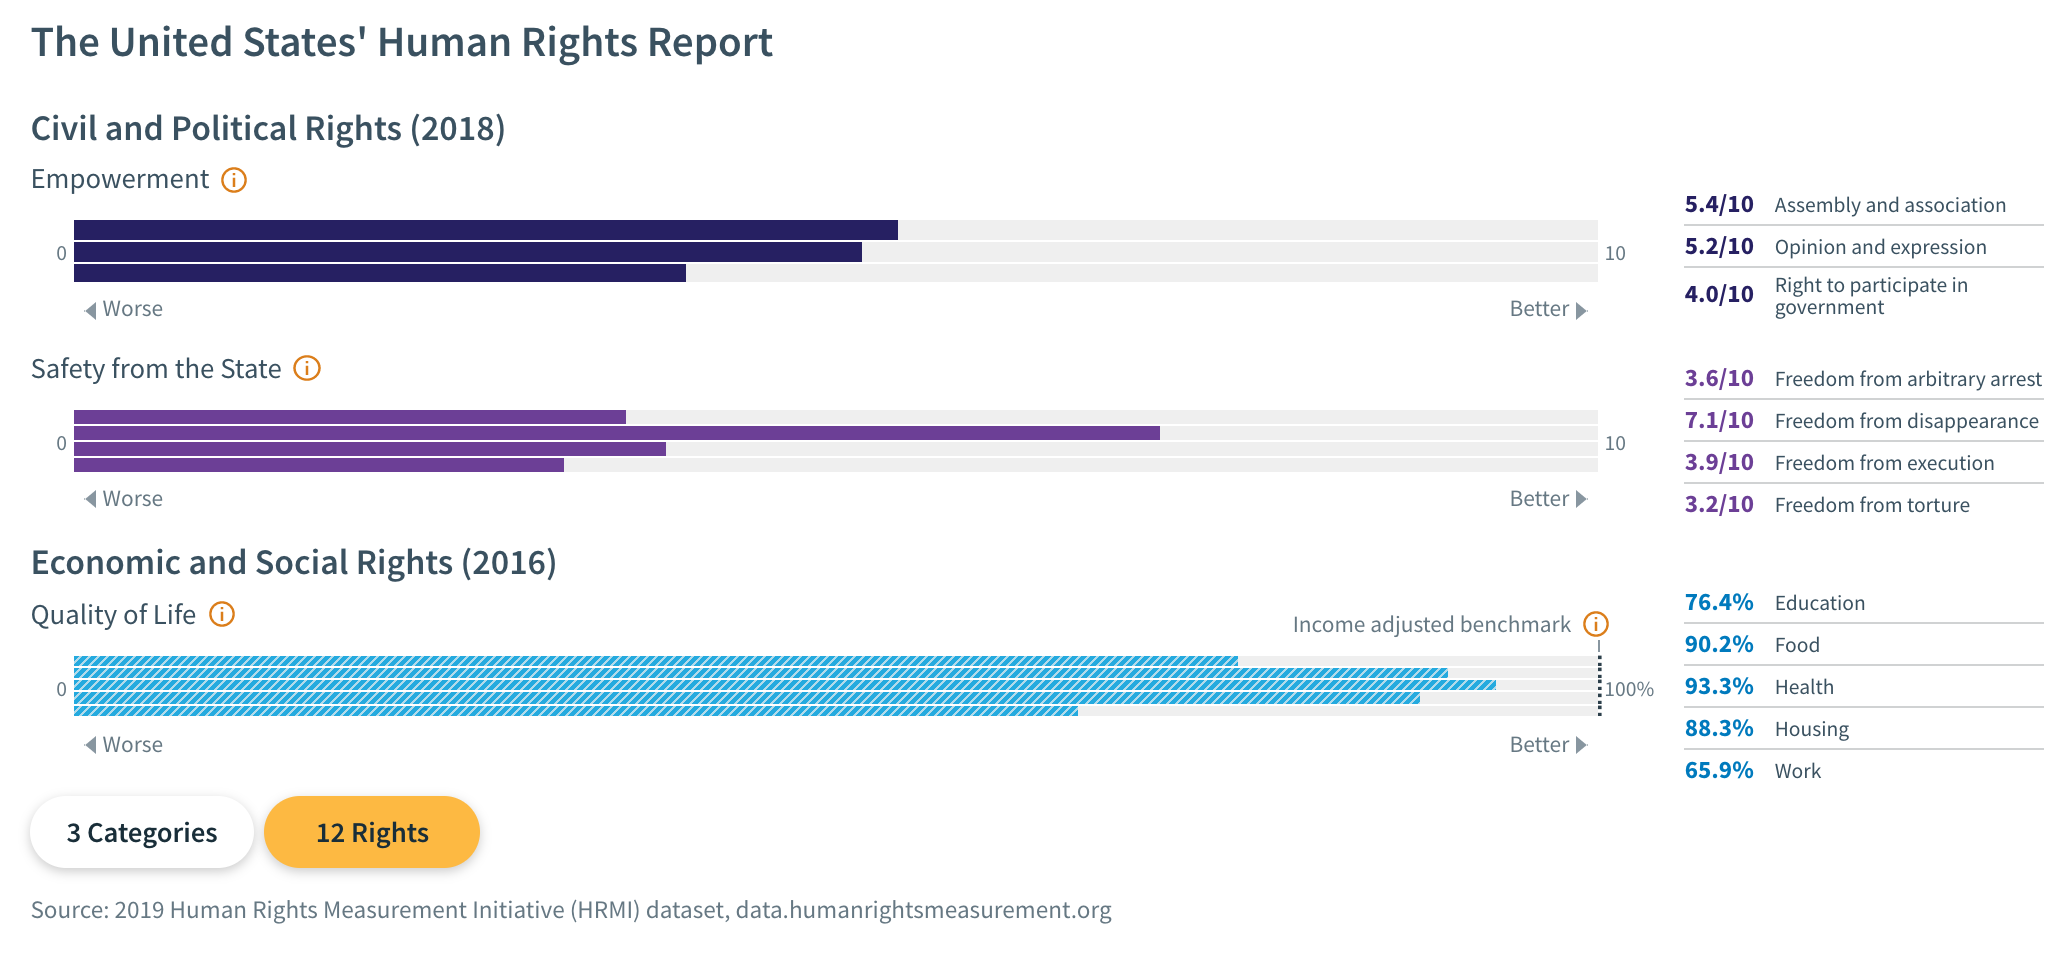 Human rights scores for the United States from the Human Rights Measurement Initiative